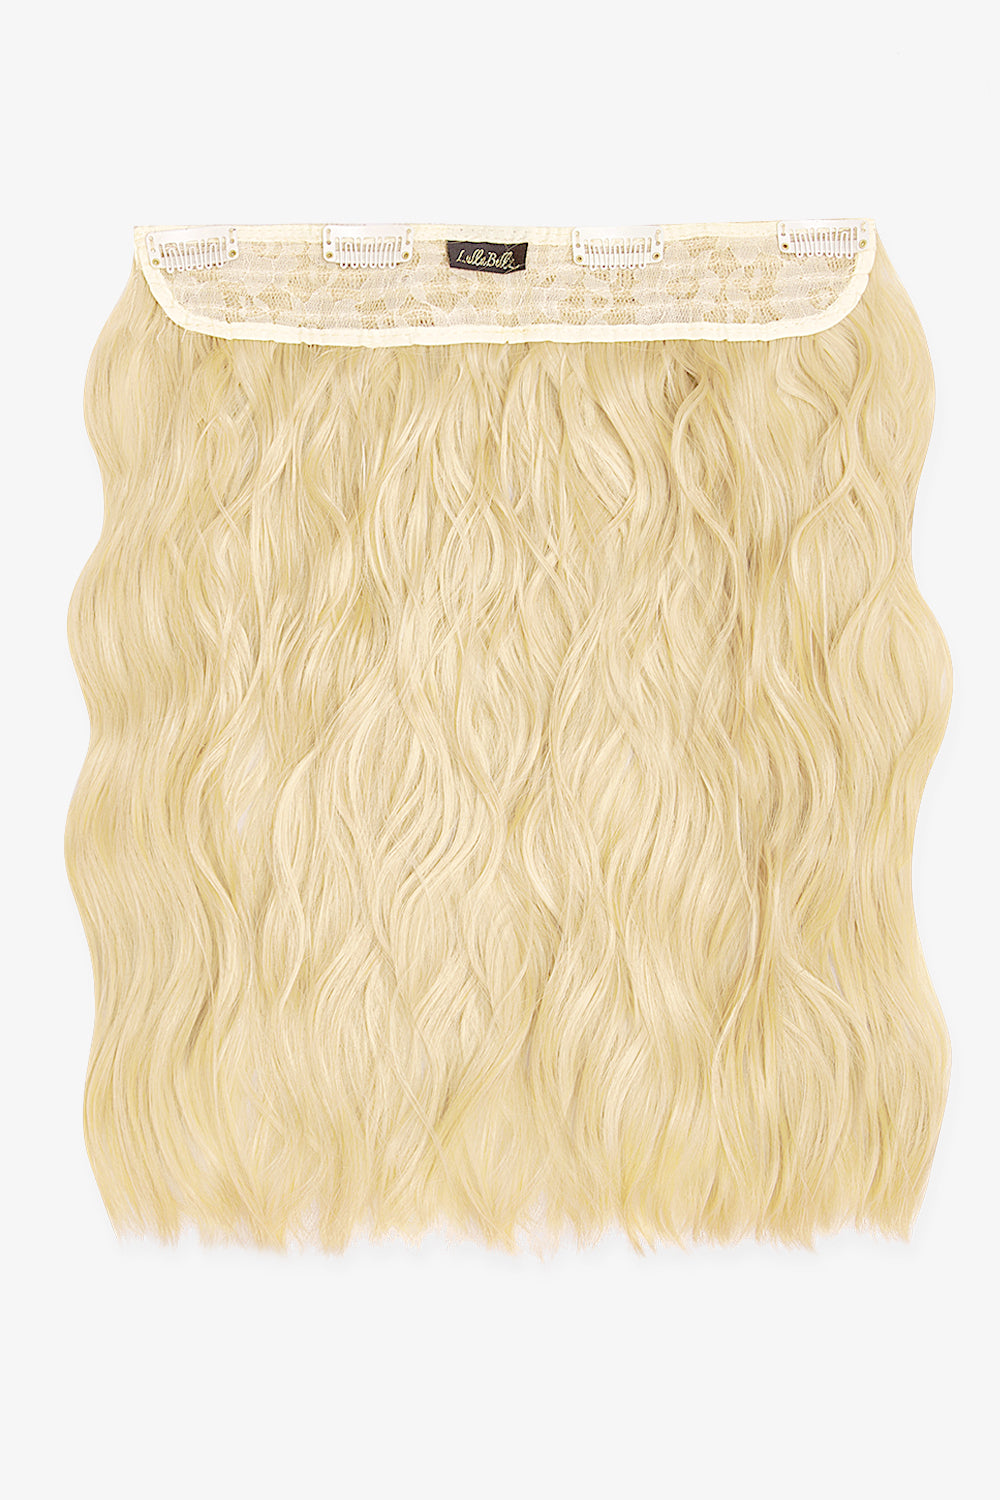 Thick 14" 1 Piece Textured Wave Clip-in Hair Extensions - Pure Blonde